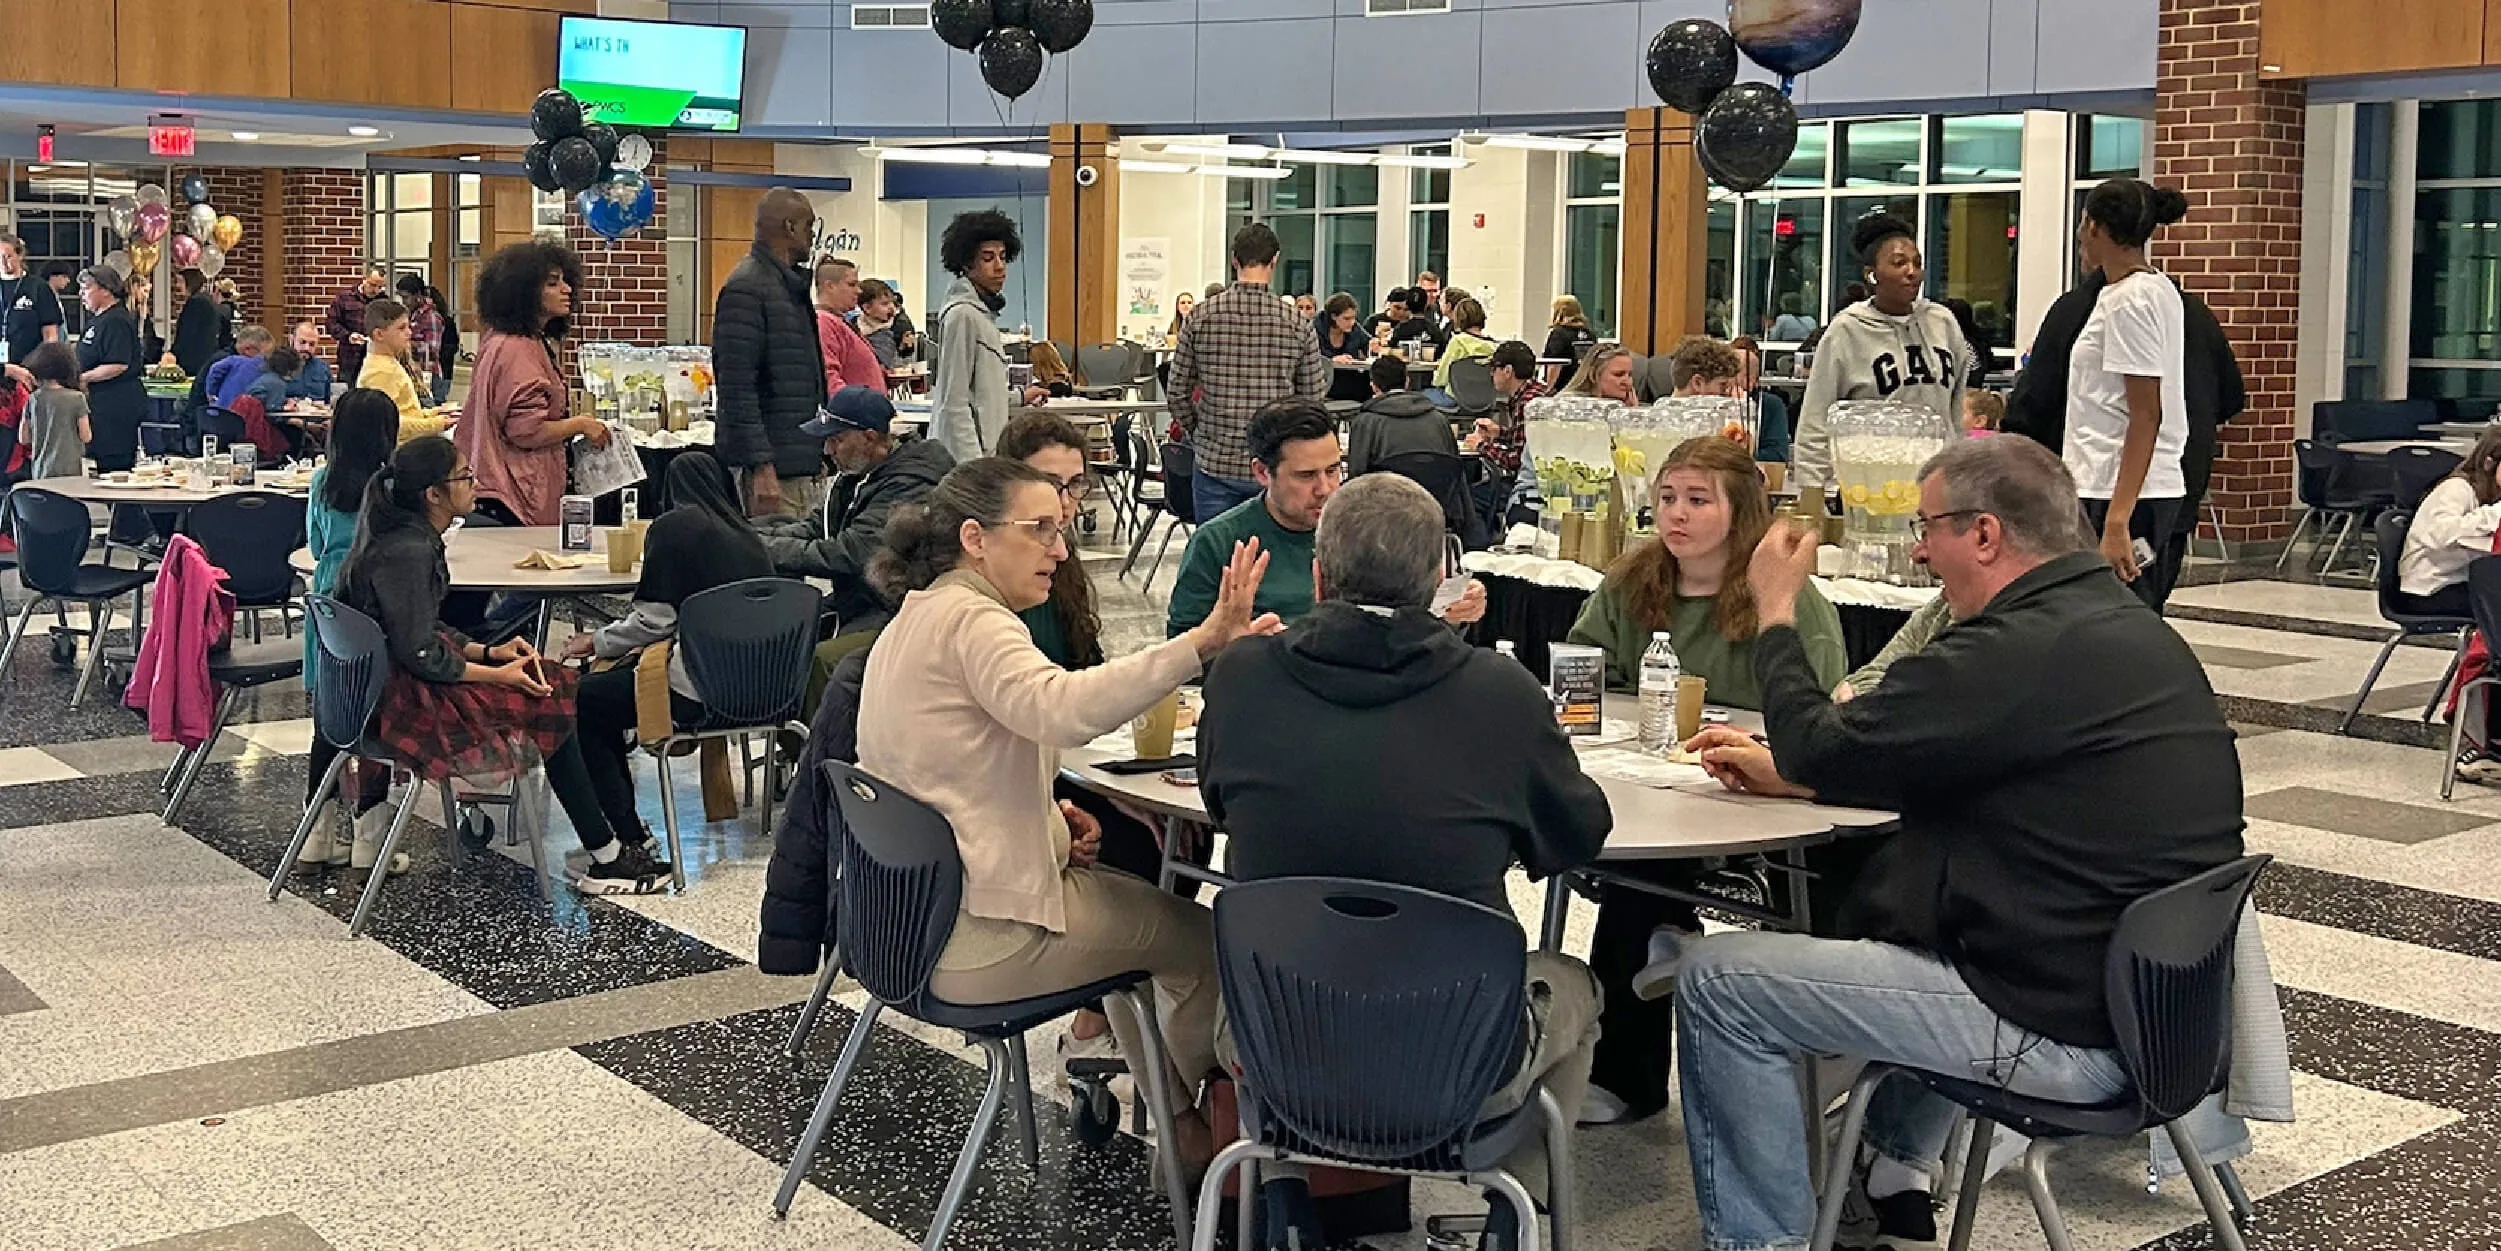 Photo of a school commons area with people sitting and eating at cafeteria tables